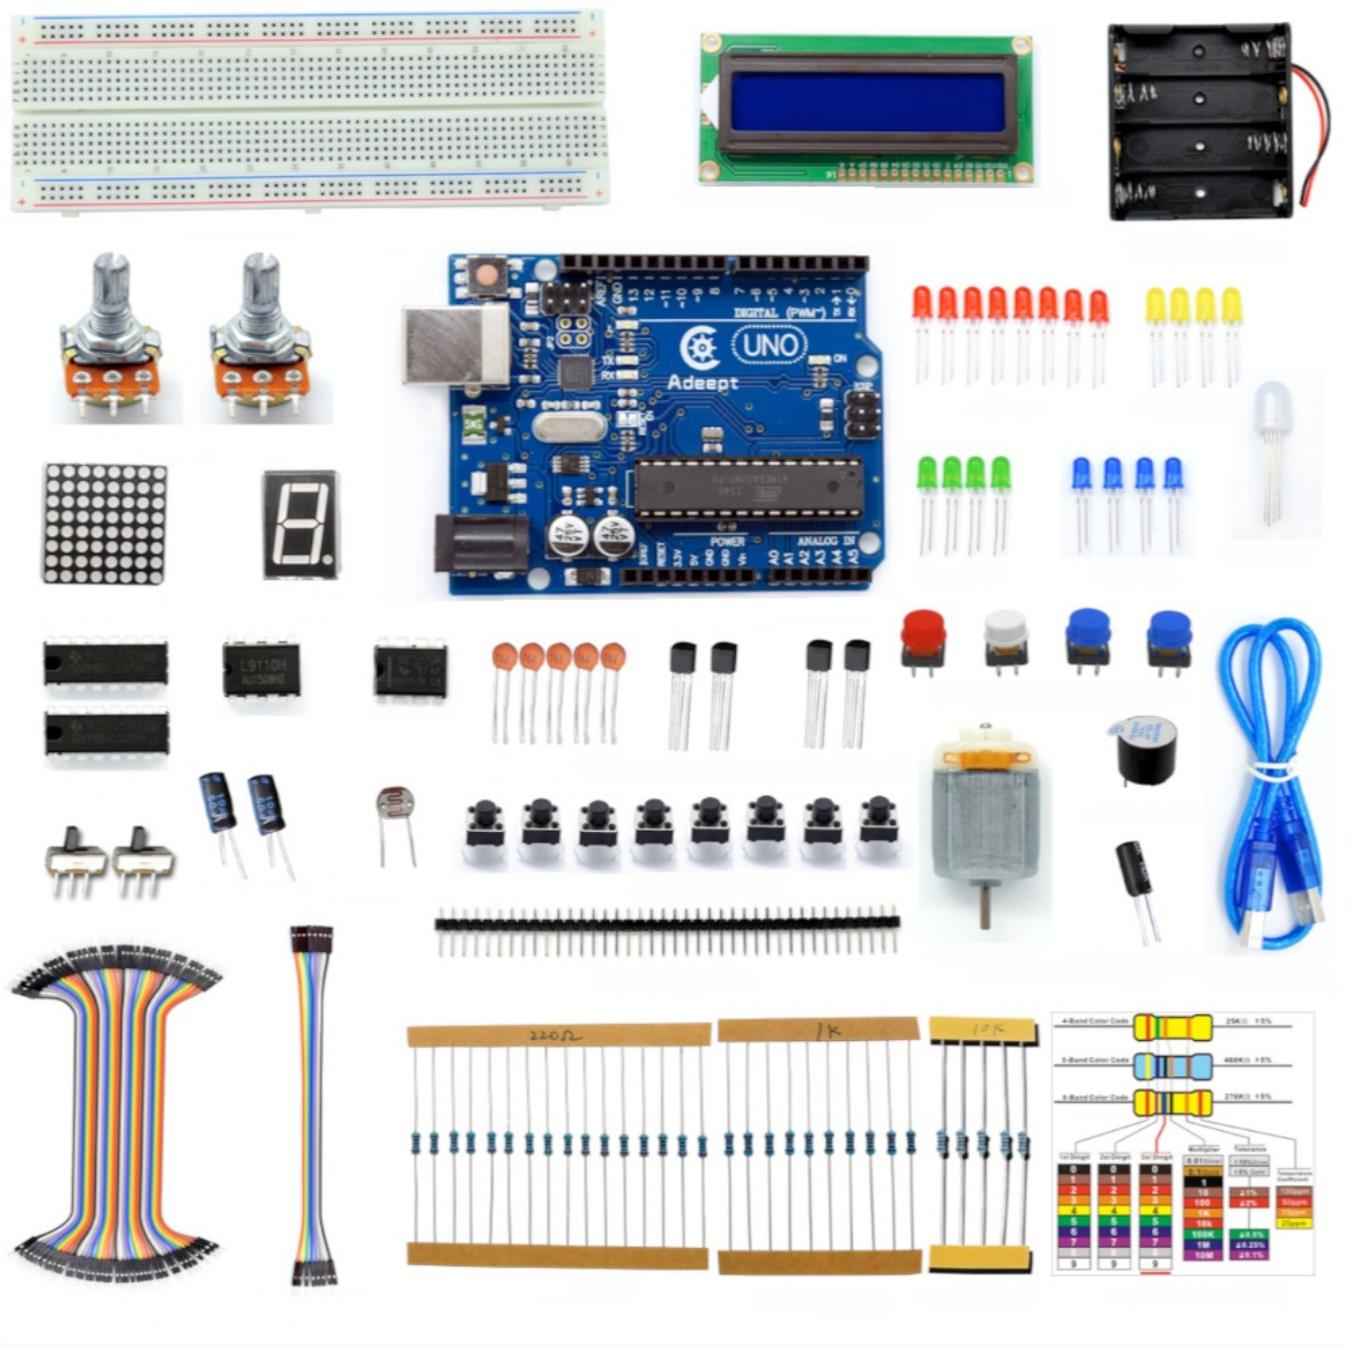 Adeept Uno R3 Super Starter Kit - Click to Enlarge